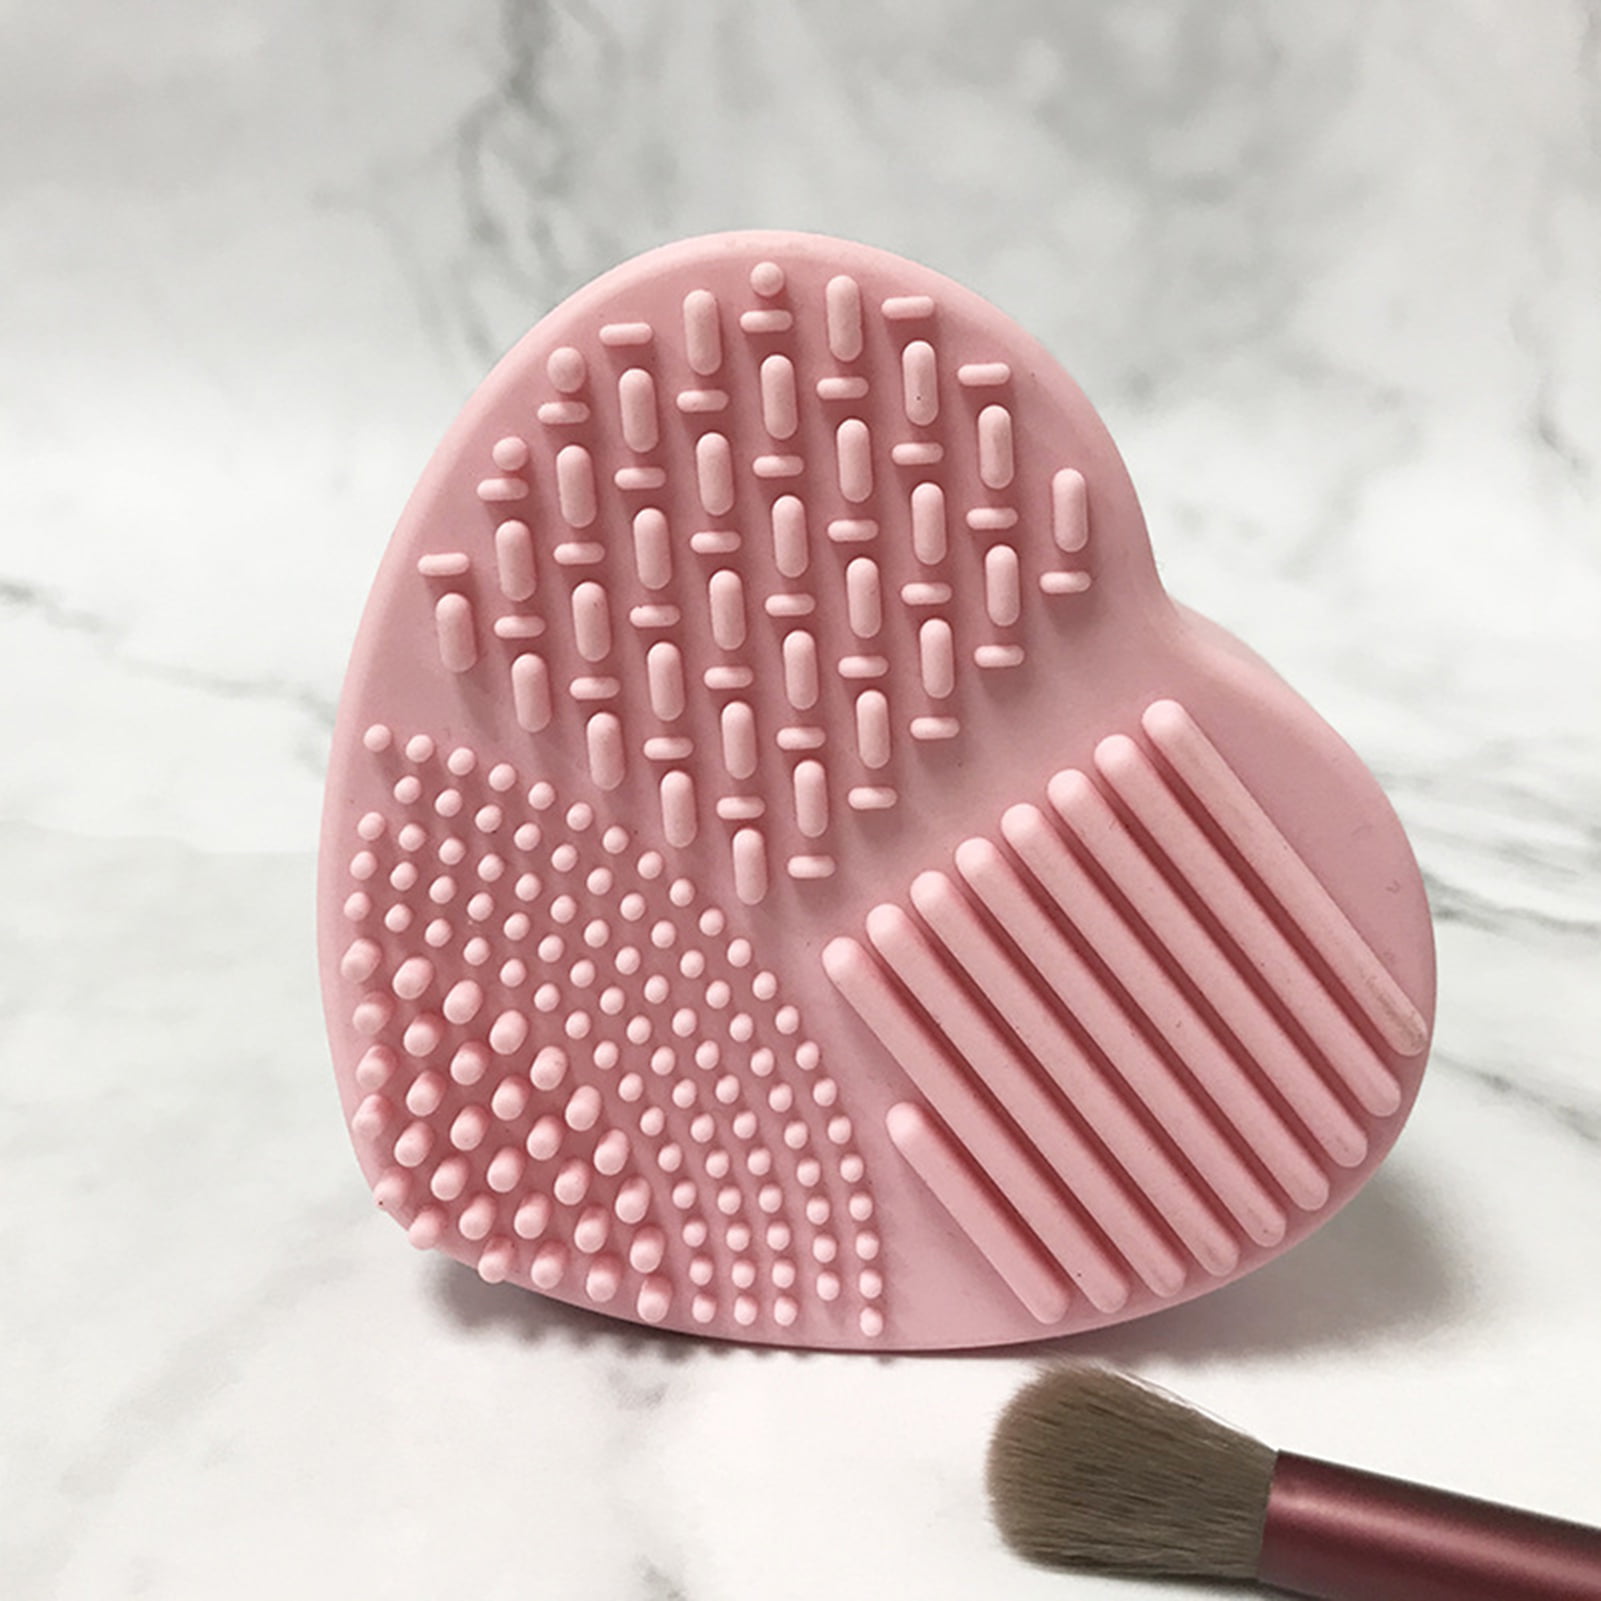 The MIŠEL Brush Cleaner